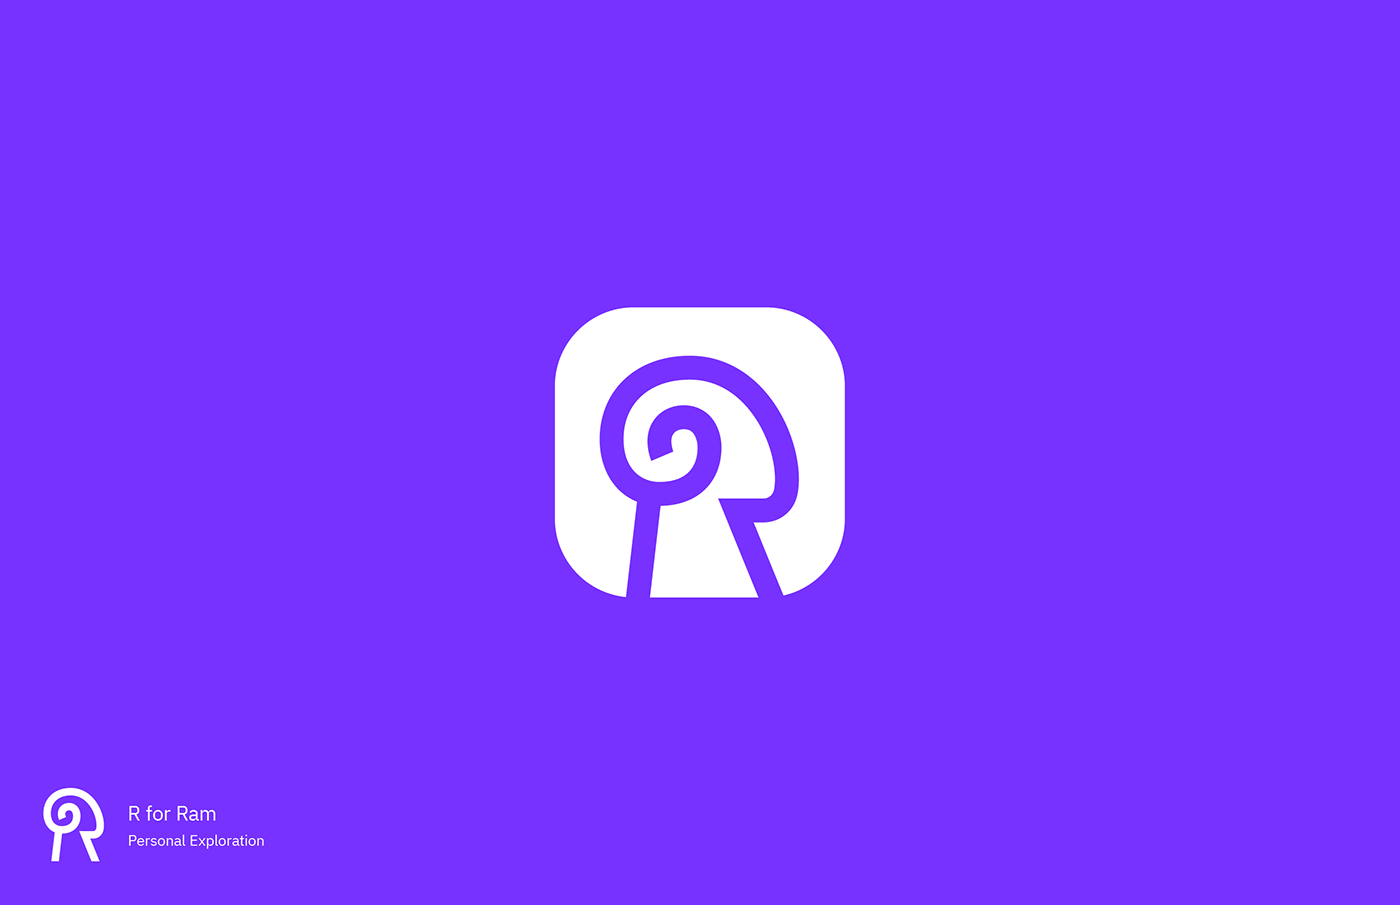 Personal Exploration based on the idea of a Ram made as letter R